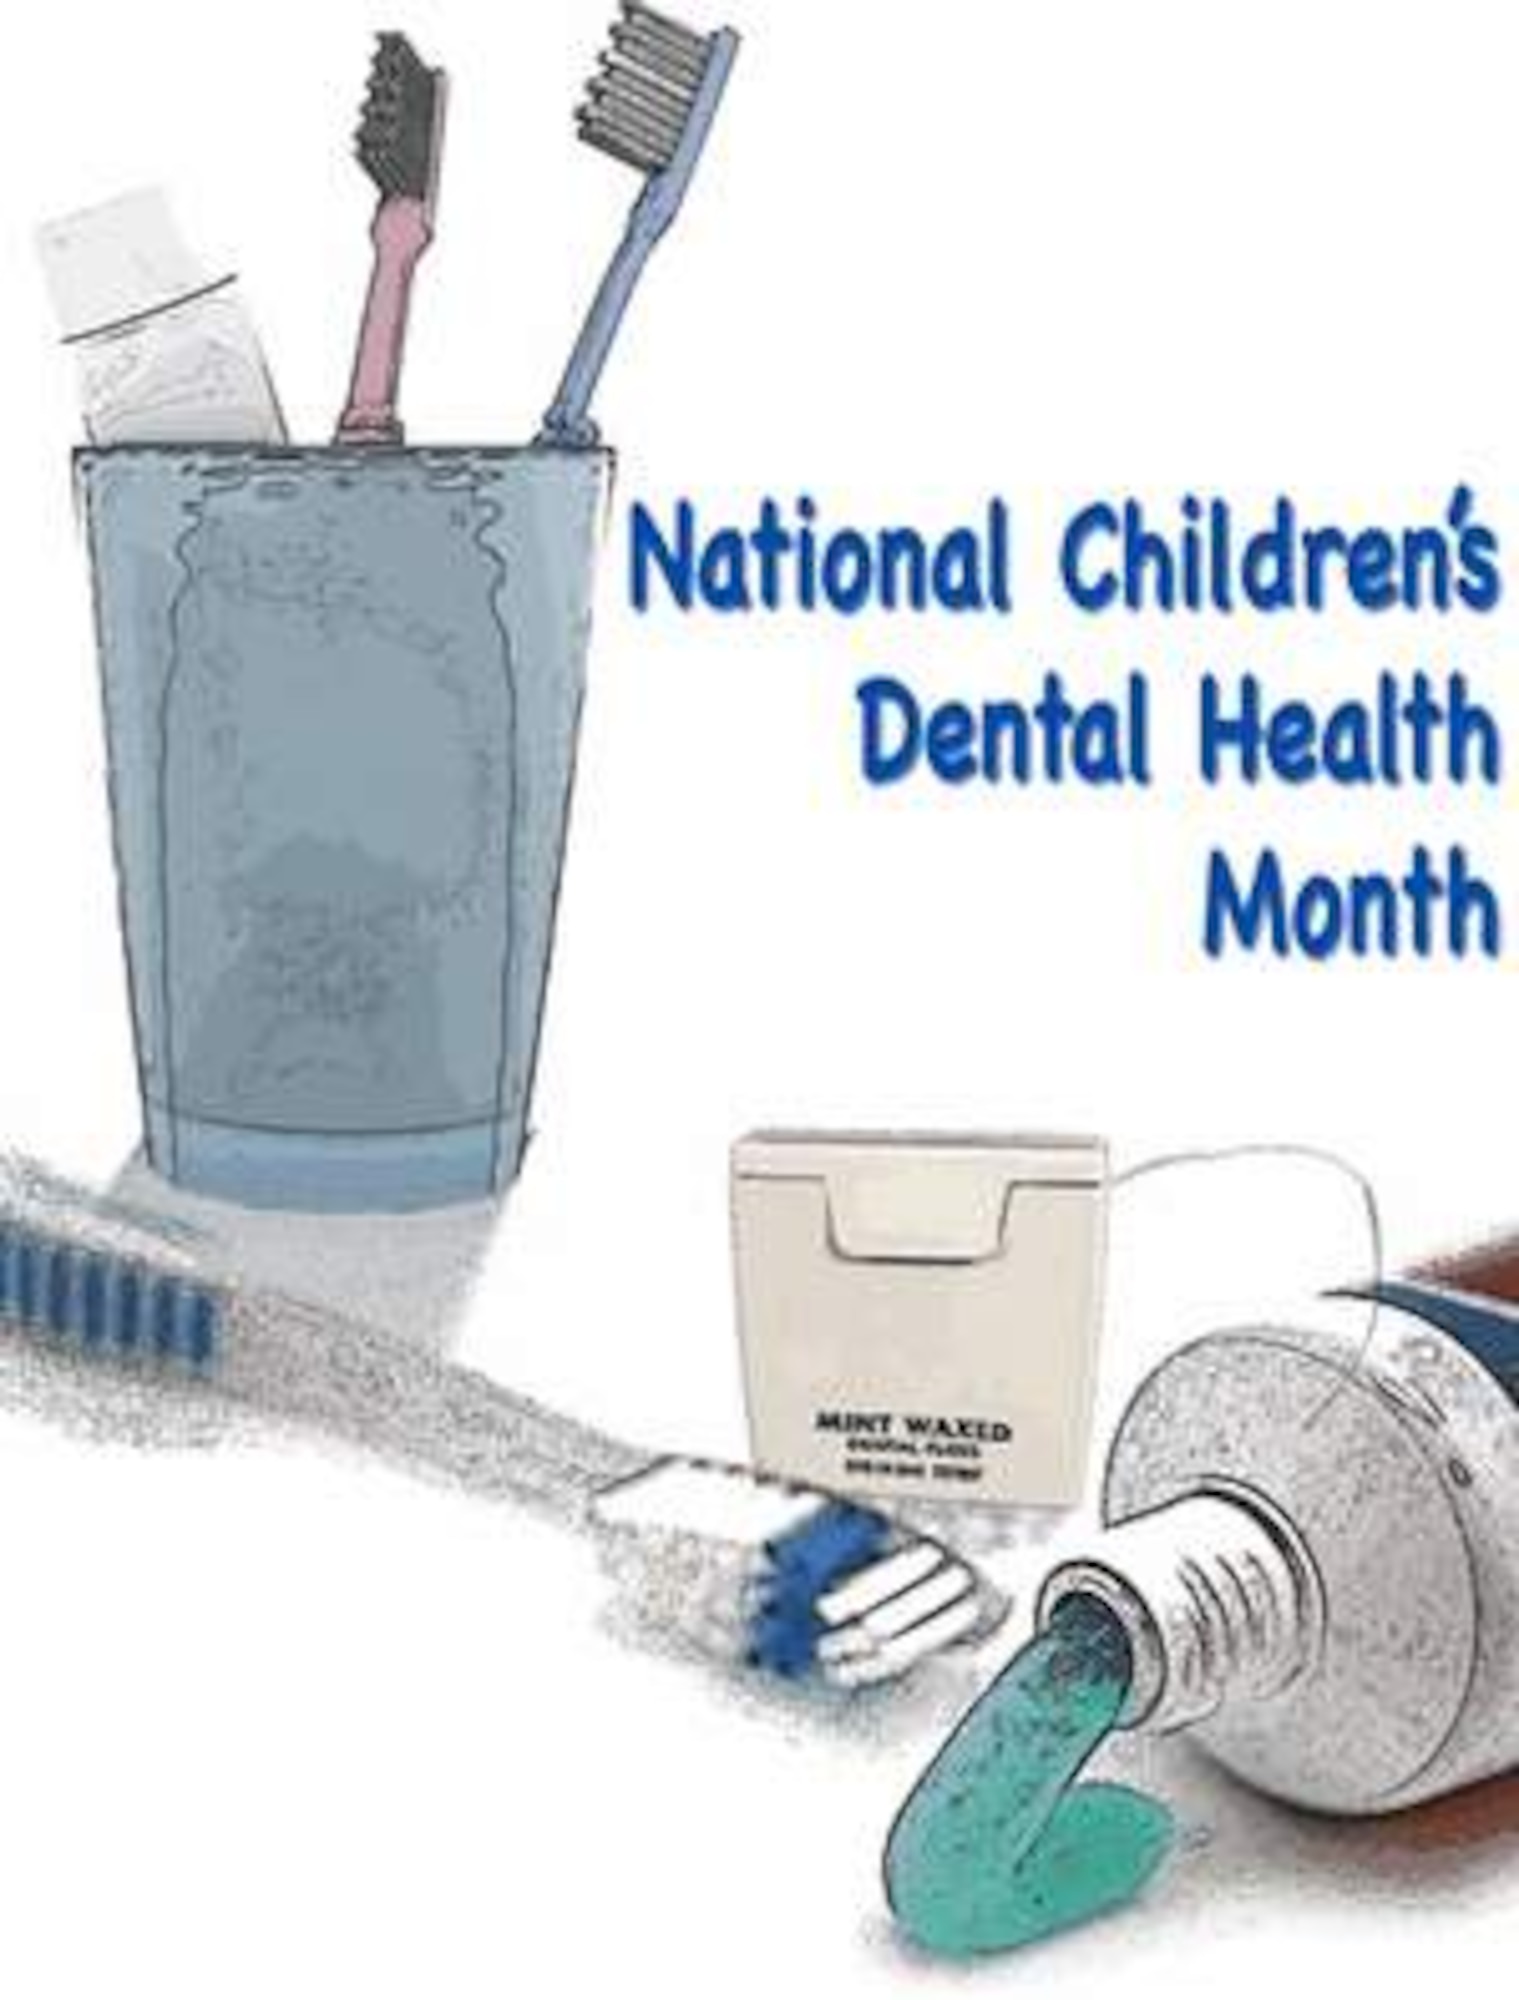 The 42nd Medical Group’s dental clinic is targeting education for both parents and children as it prepares for February’s National Children’s Dental Health Month. (Air Force illustration by Michael Paul)